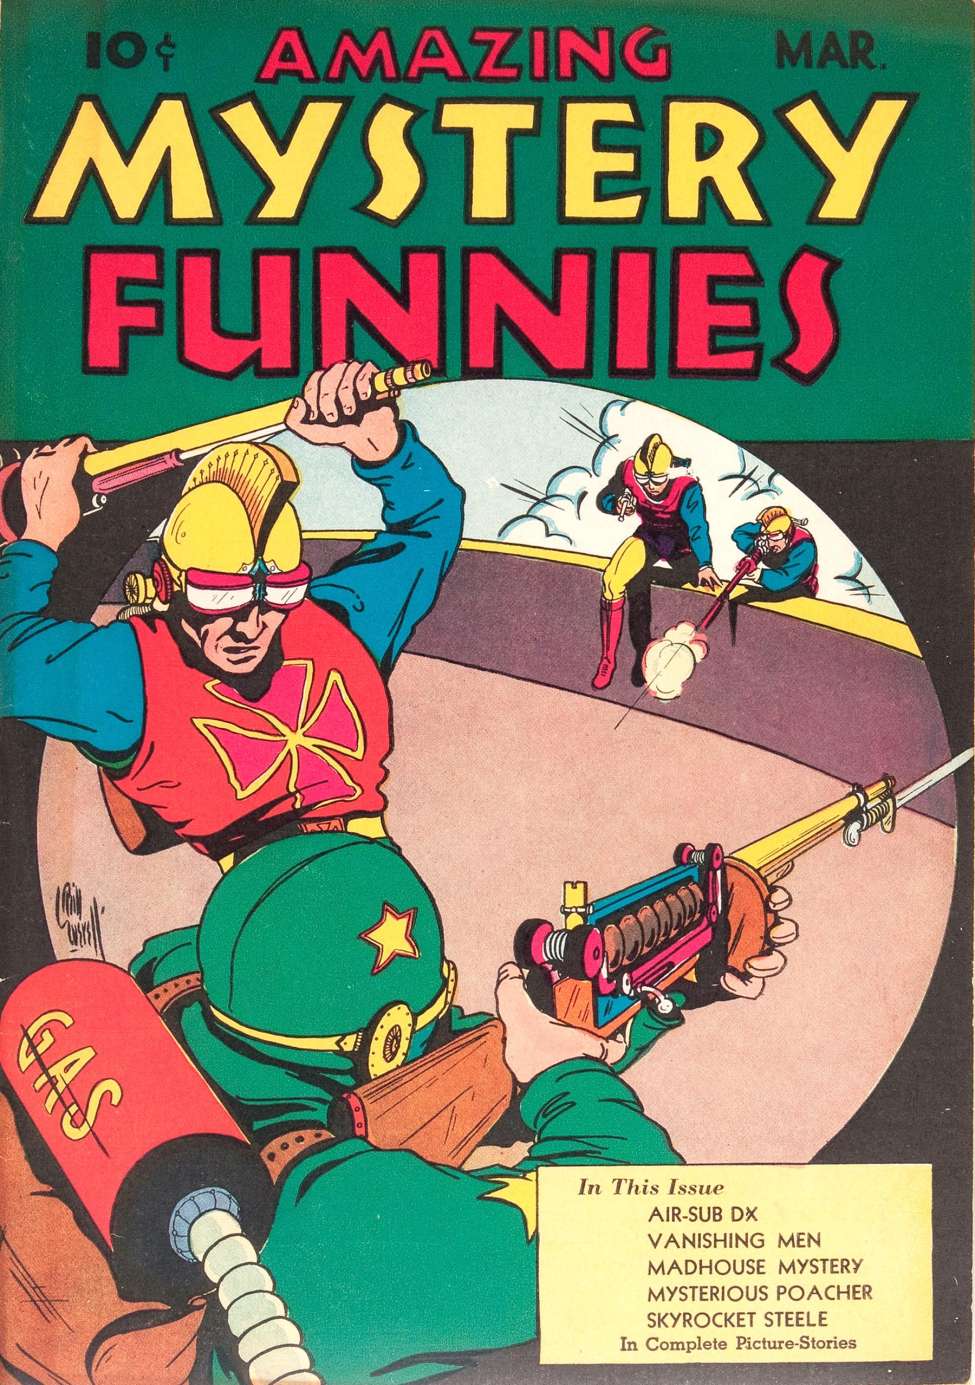 Book Cover For Amazing Mystery Funnies 7 (v2 3) - Version 2